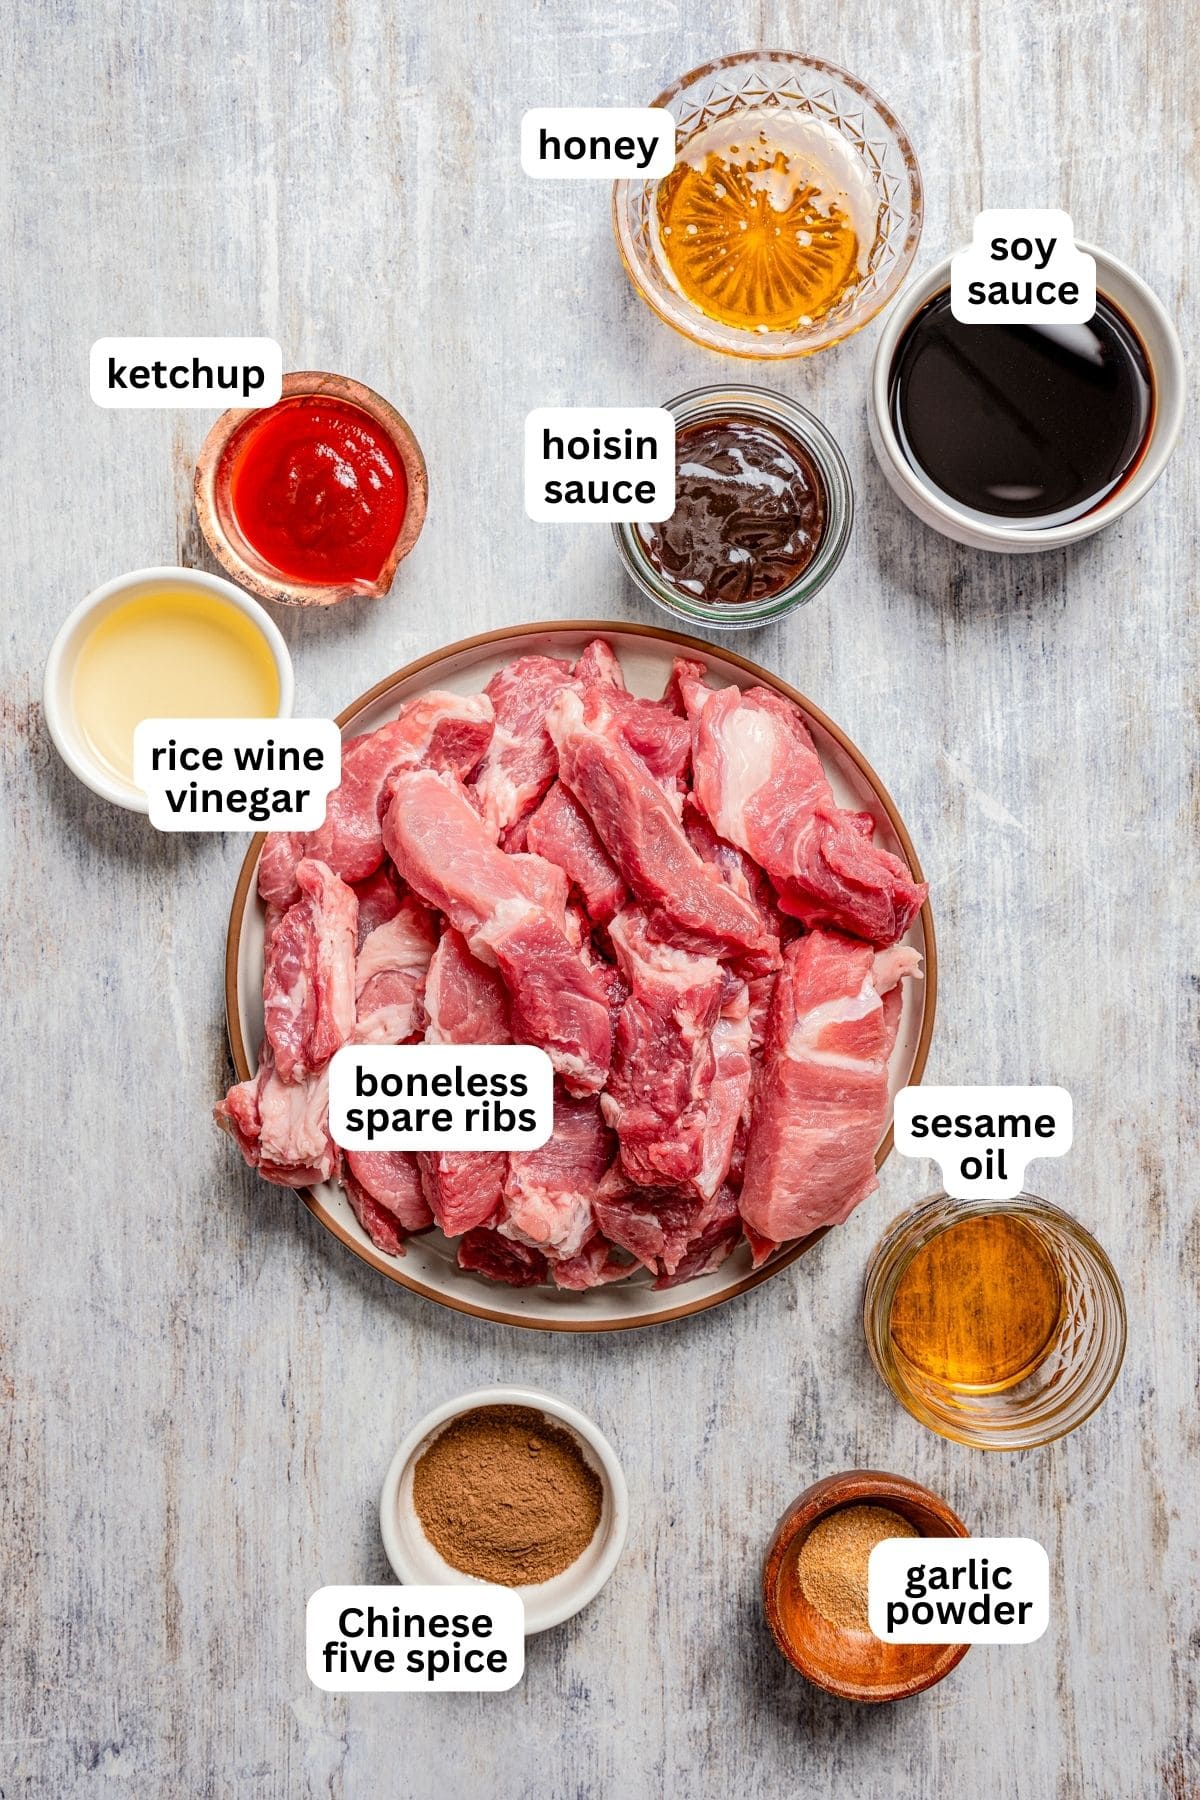 Ingredients for Chinese boneless spare ribs.